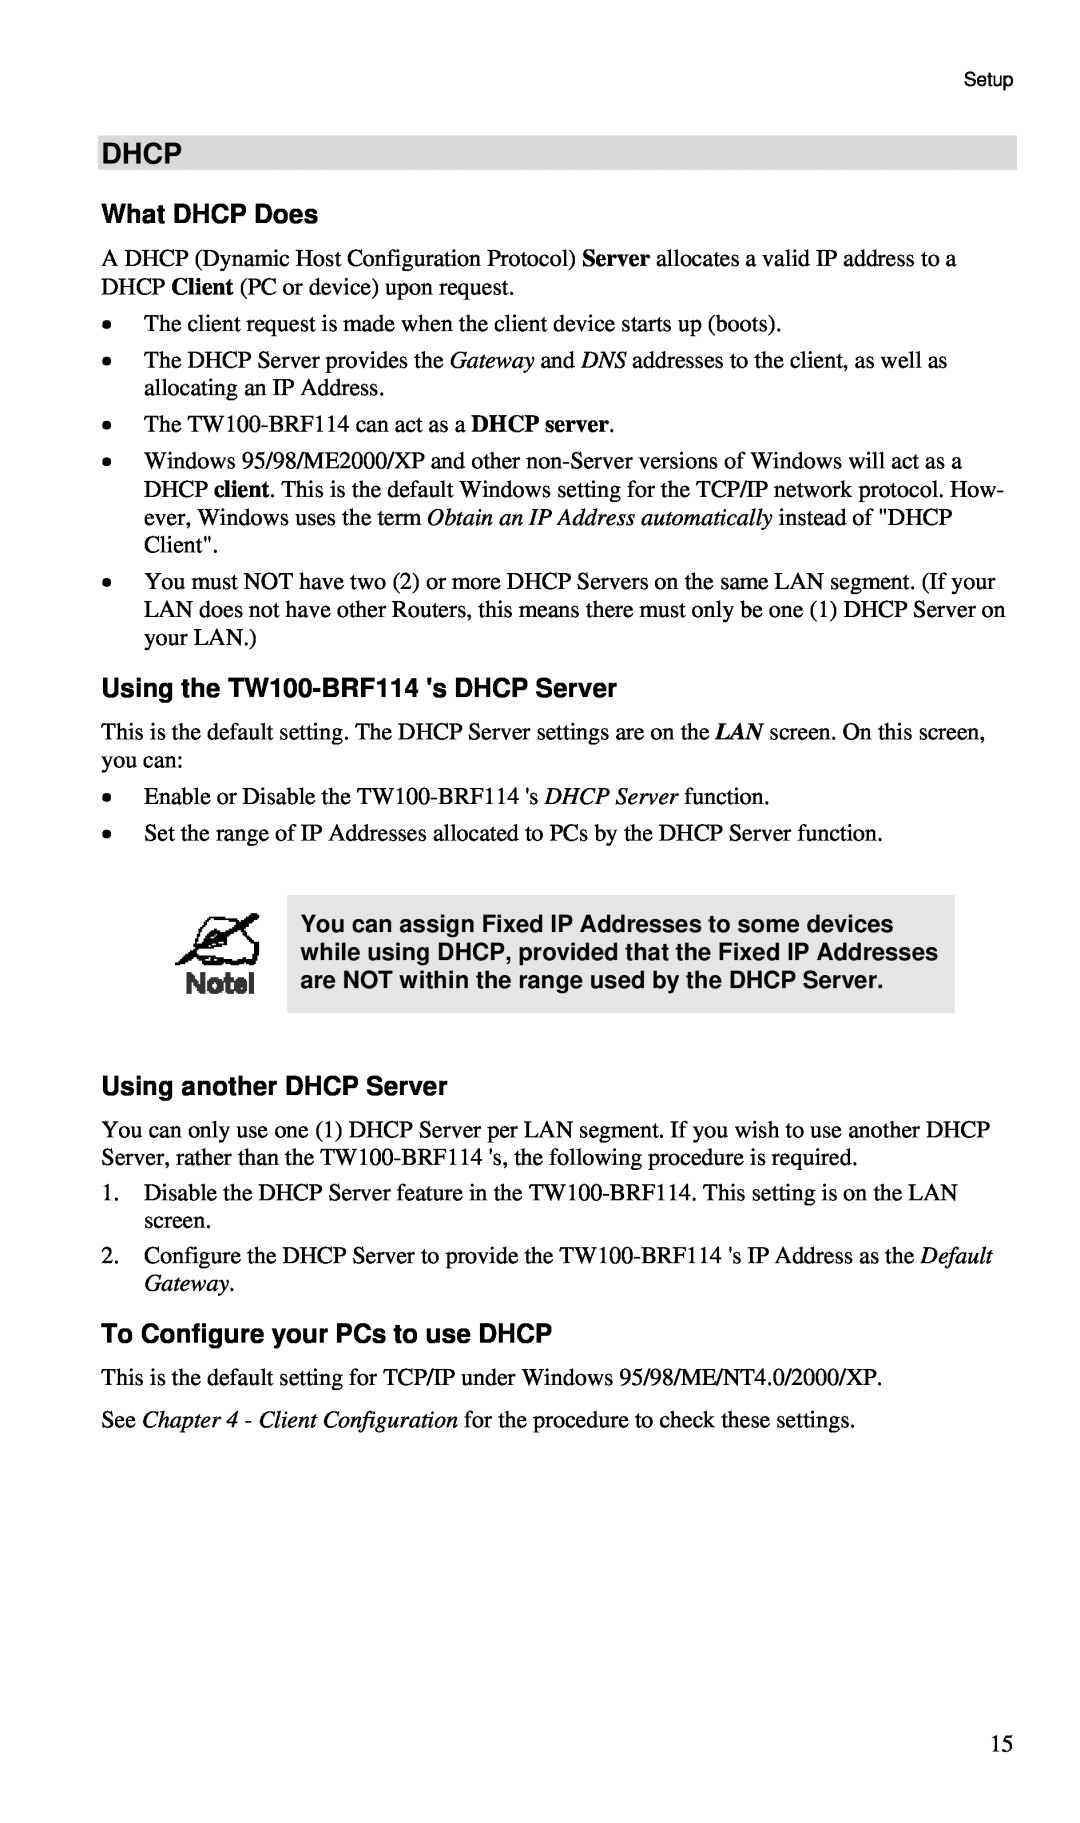 TRENDnet manual Dhcp, What DHCP Does, Using the TW100-BRF114 s DHCP Server, Using another DHCP Server 